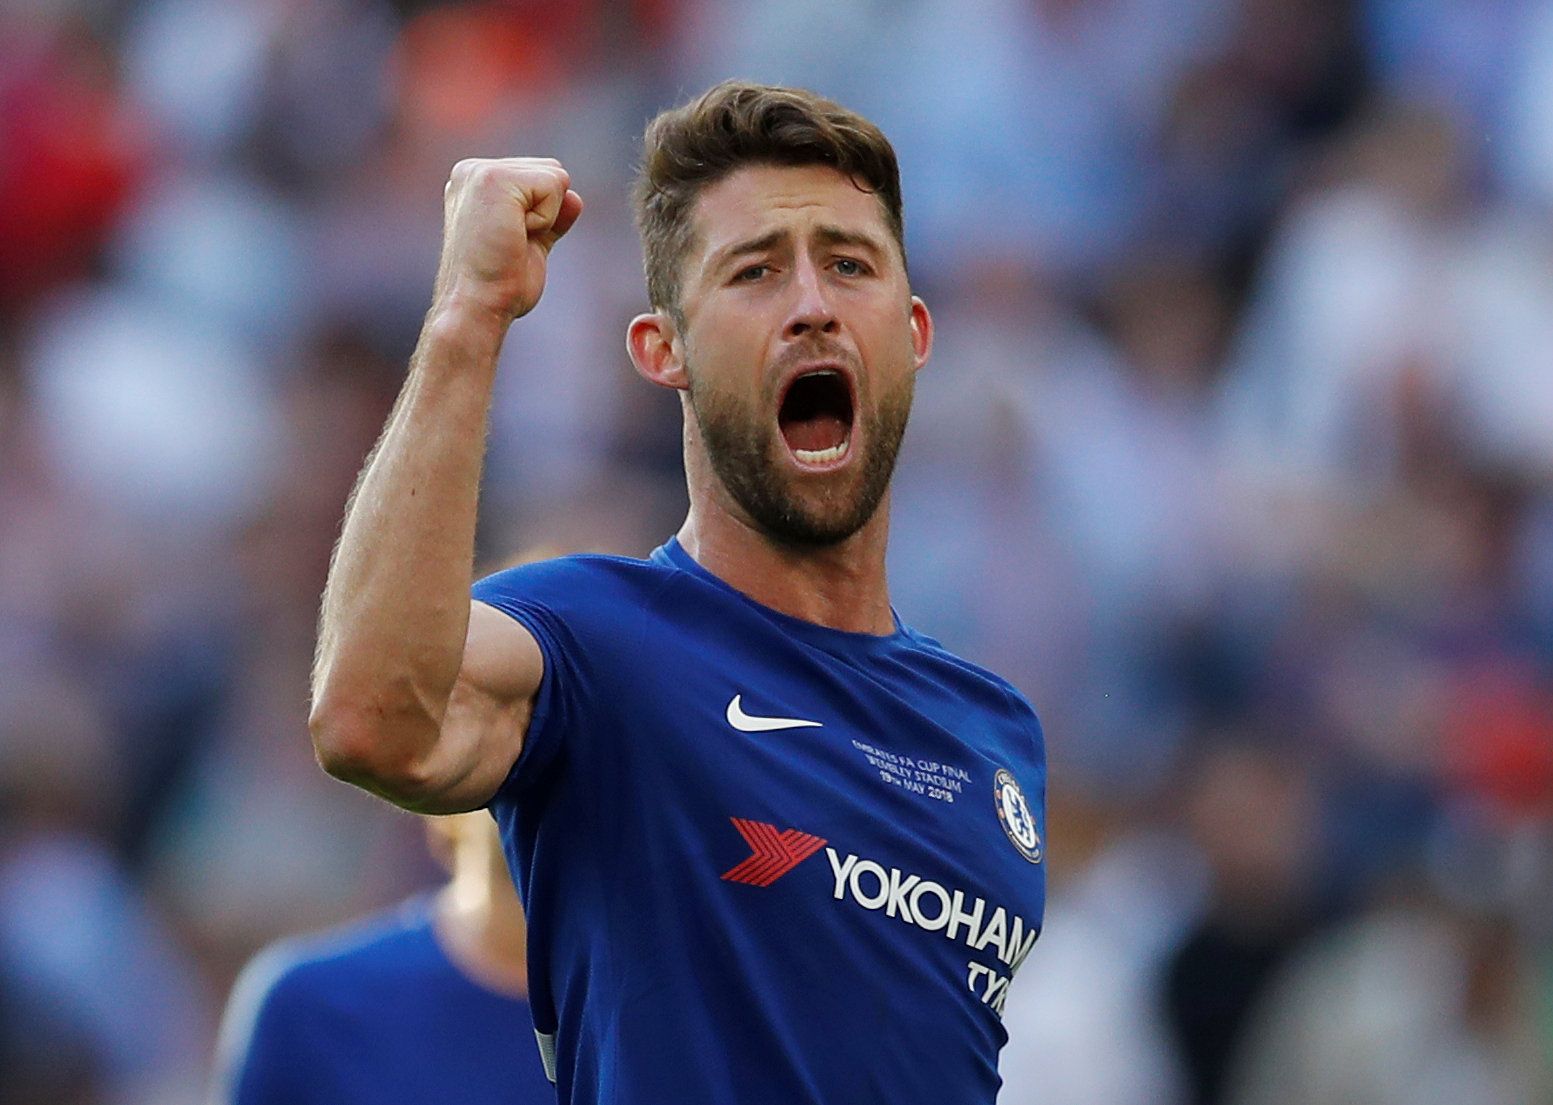 Soccer Football - FA Cup Final - Chelsea vs Manchester United - Wembley Stadium, London, Britain - May 19, 2018   Chelsea's Gary Cahill celebrates after the match   Action Images via Reuters/Andrew Couldridge